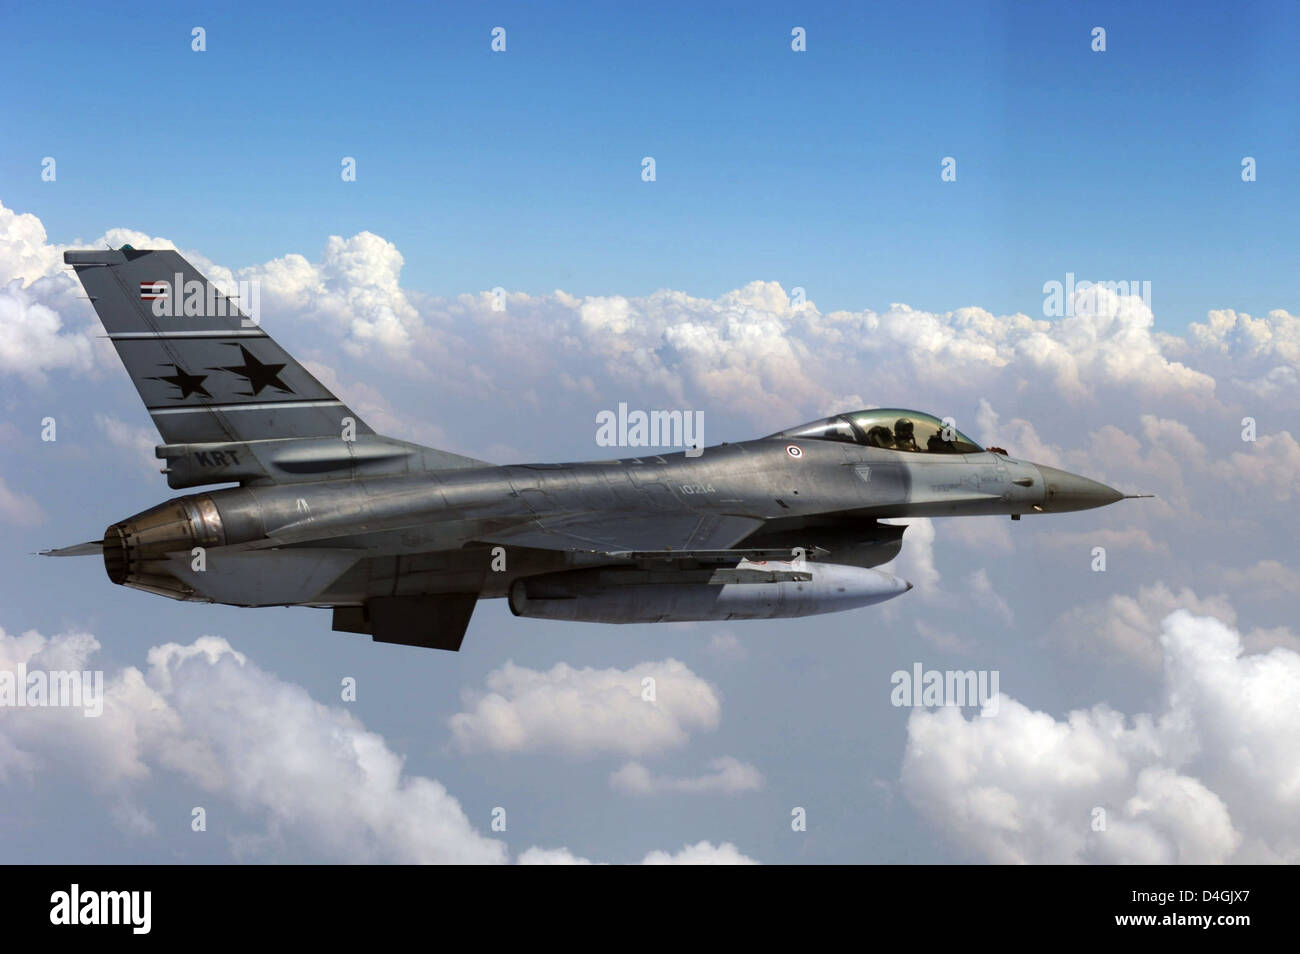 A Royal Thai Air Force F-16 Fighting Falcon aircraft conducts tactical flight operations during Cope Tiger 13 March 12, 2013 at Korat Royal Thai Air Force Base, Thailand. Cope Tiger is an annual multilateral aerial exercise designed to improve readiness and cooperation between US, Thai and Singaporean forces. Stock Photo